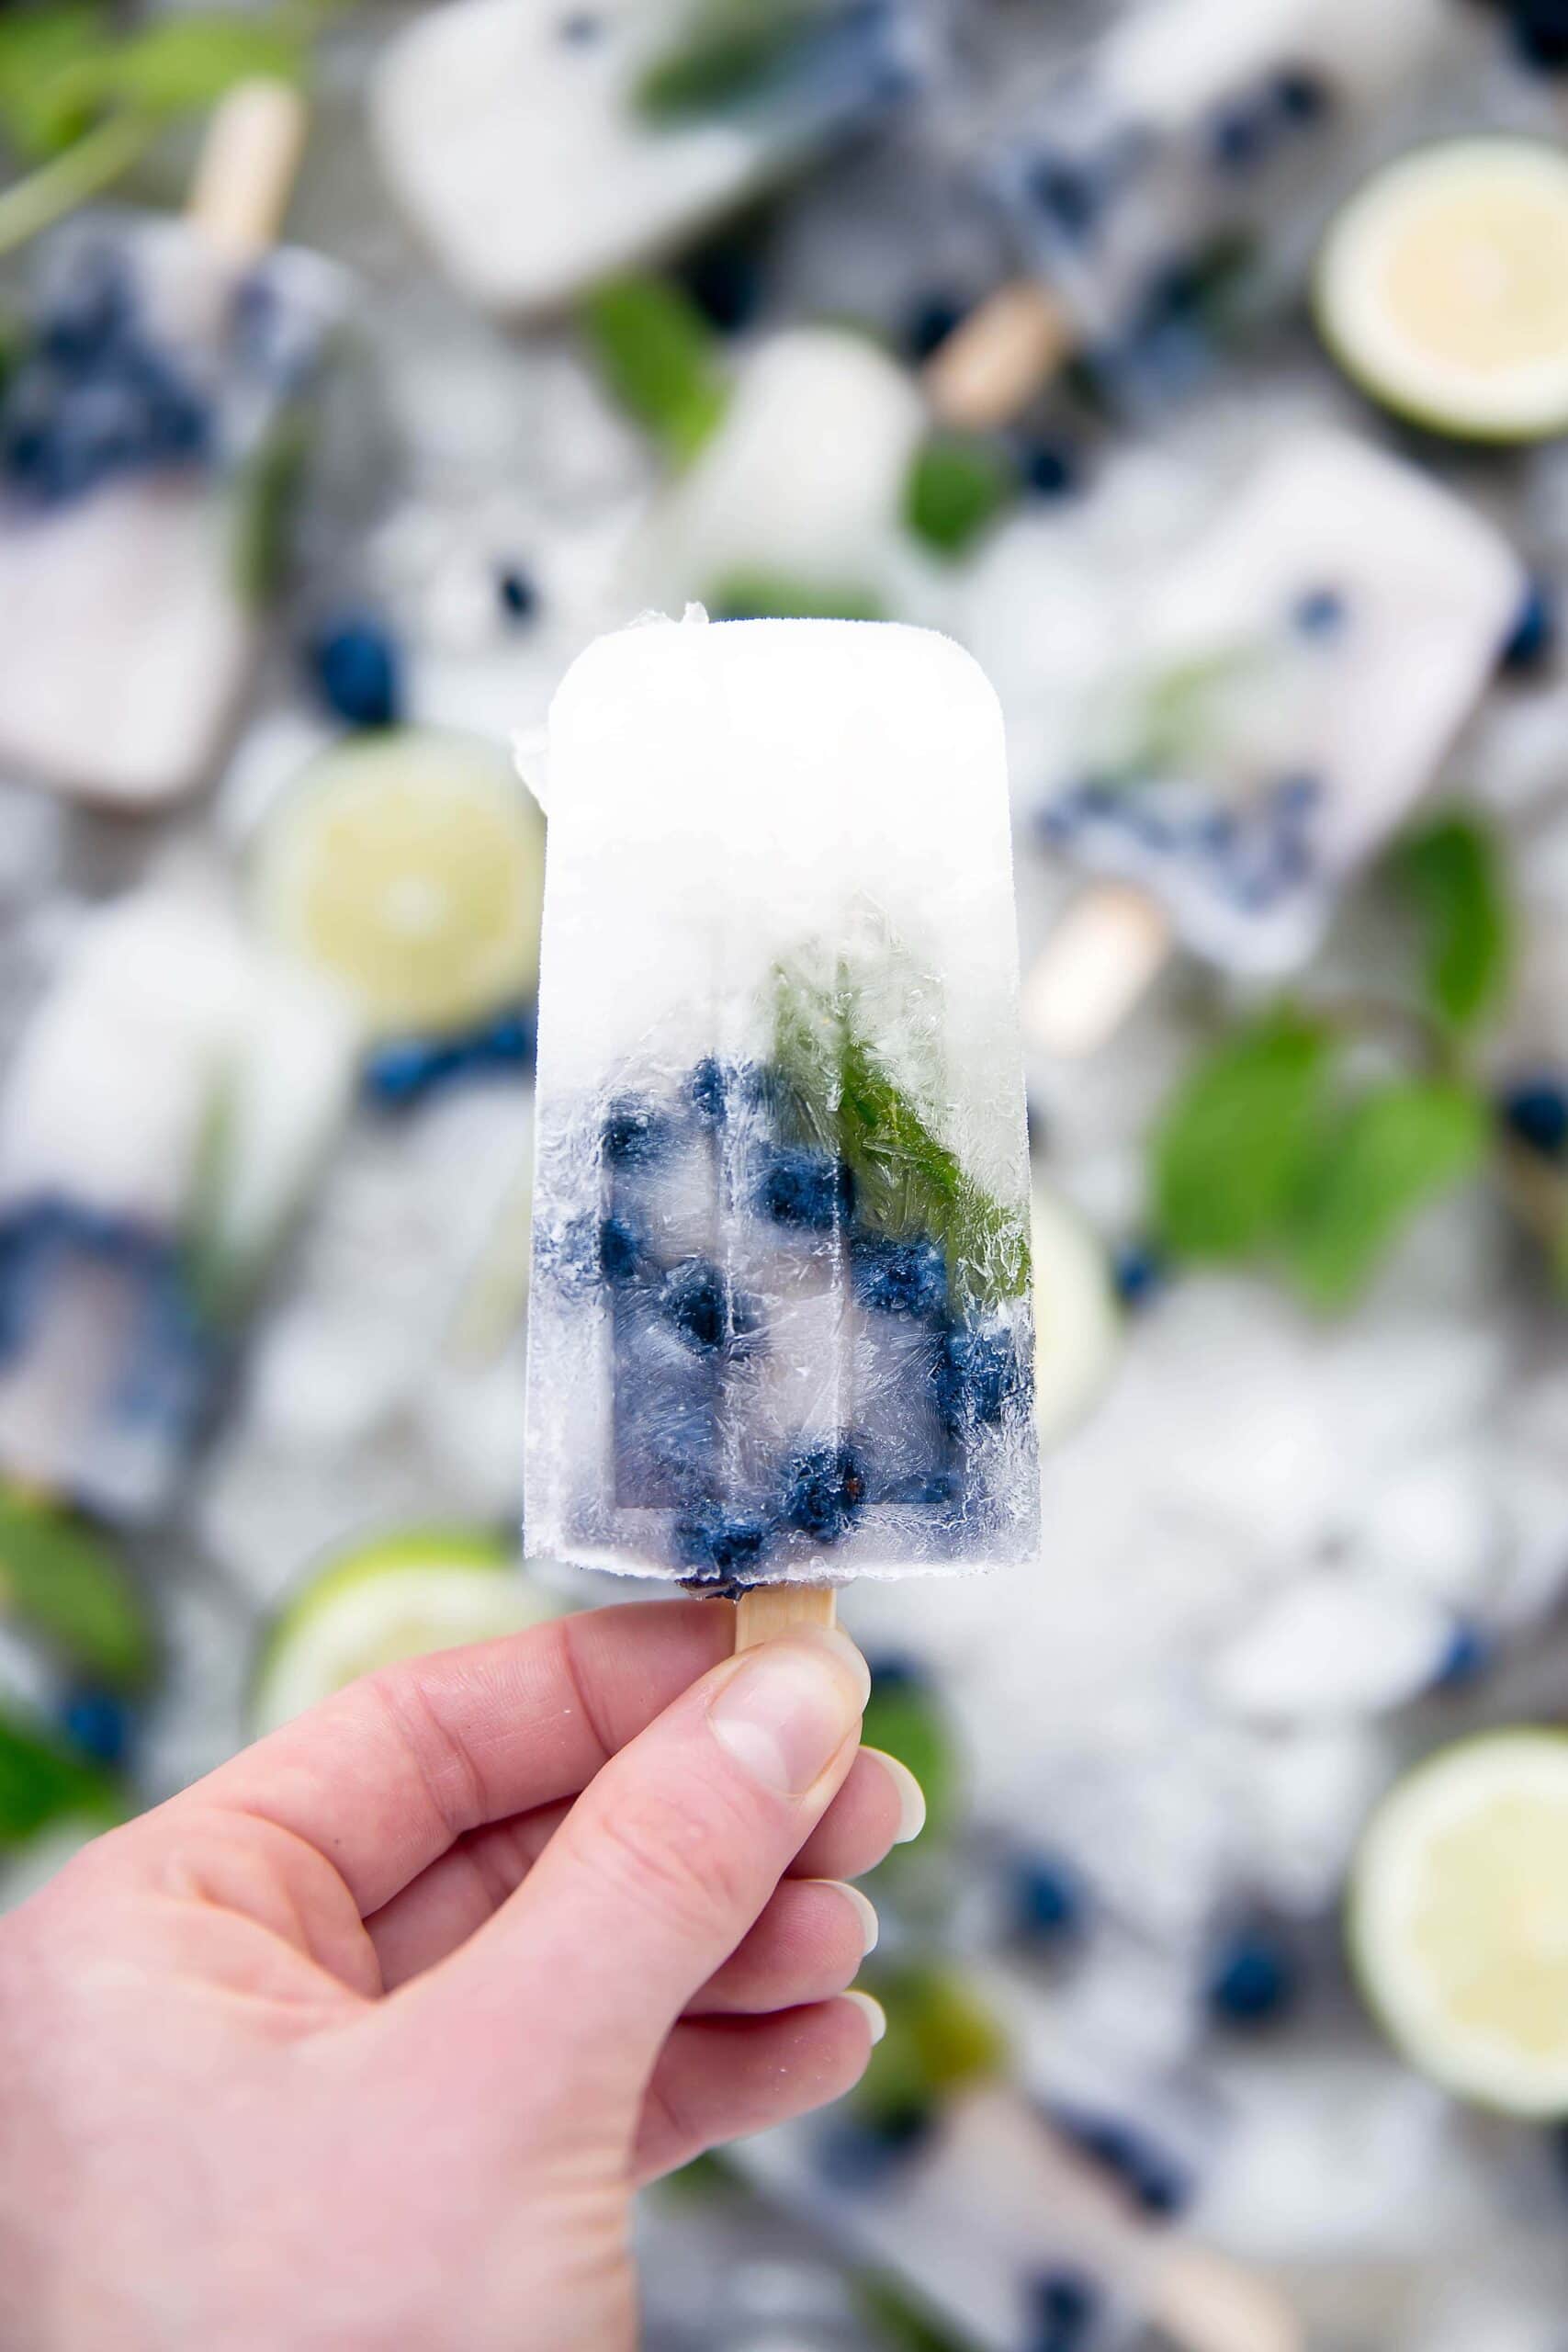 Blueberry Mojito Popsicles